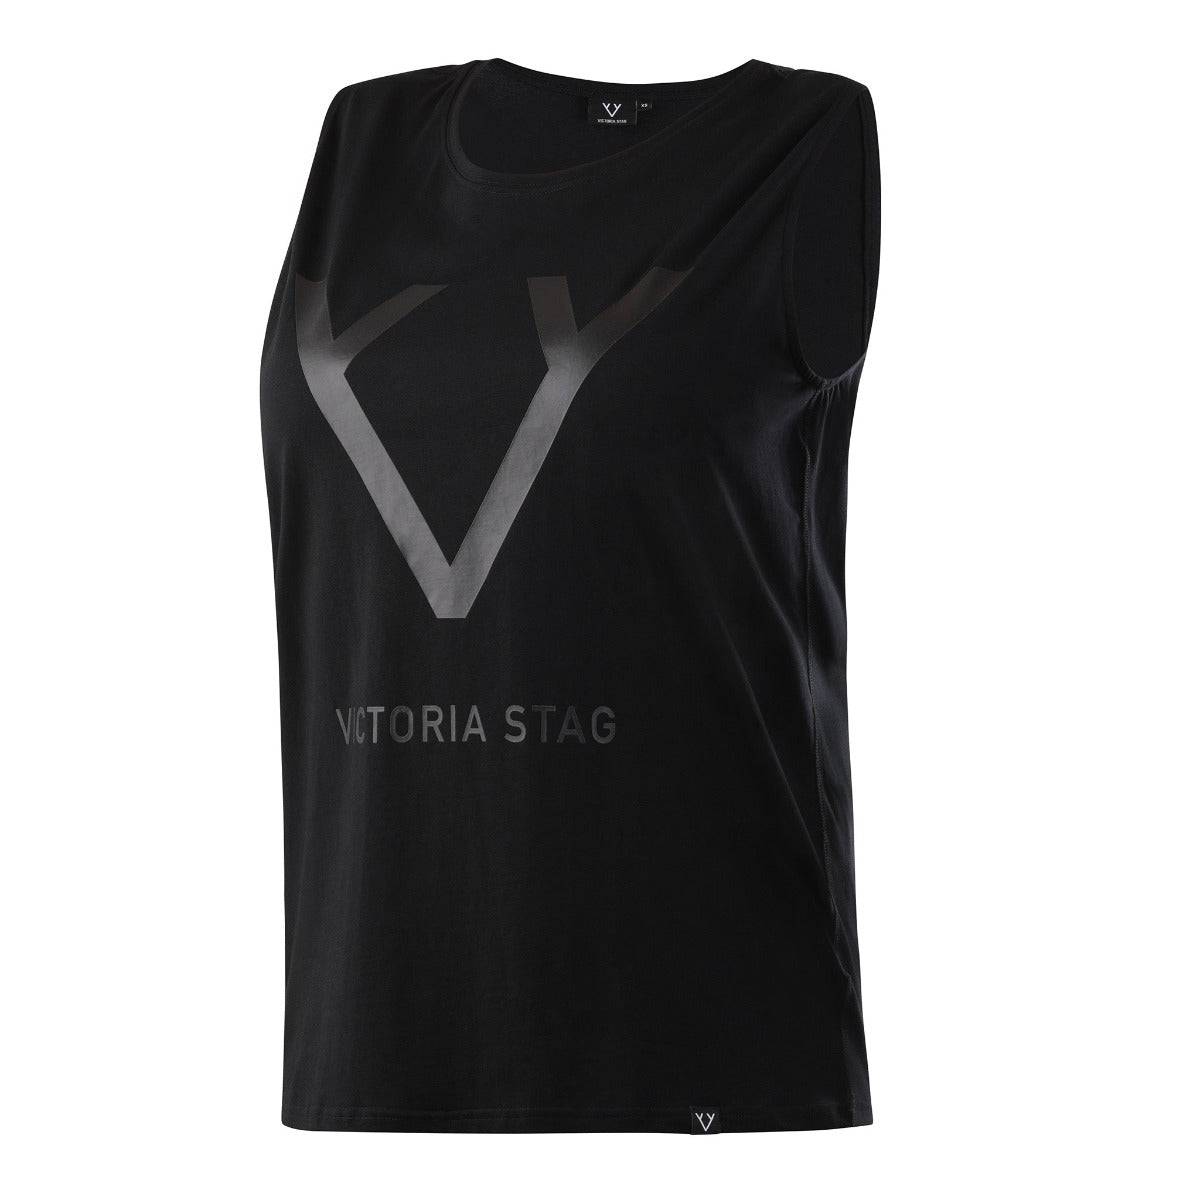 Victoria Stag's Core Muscle Tank in Black front